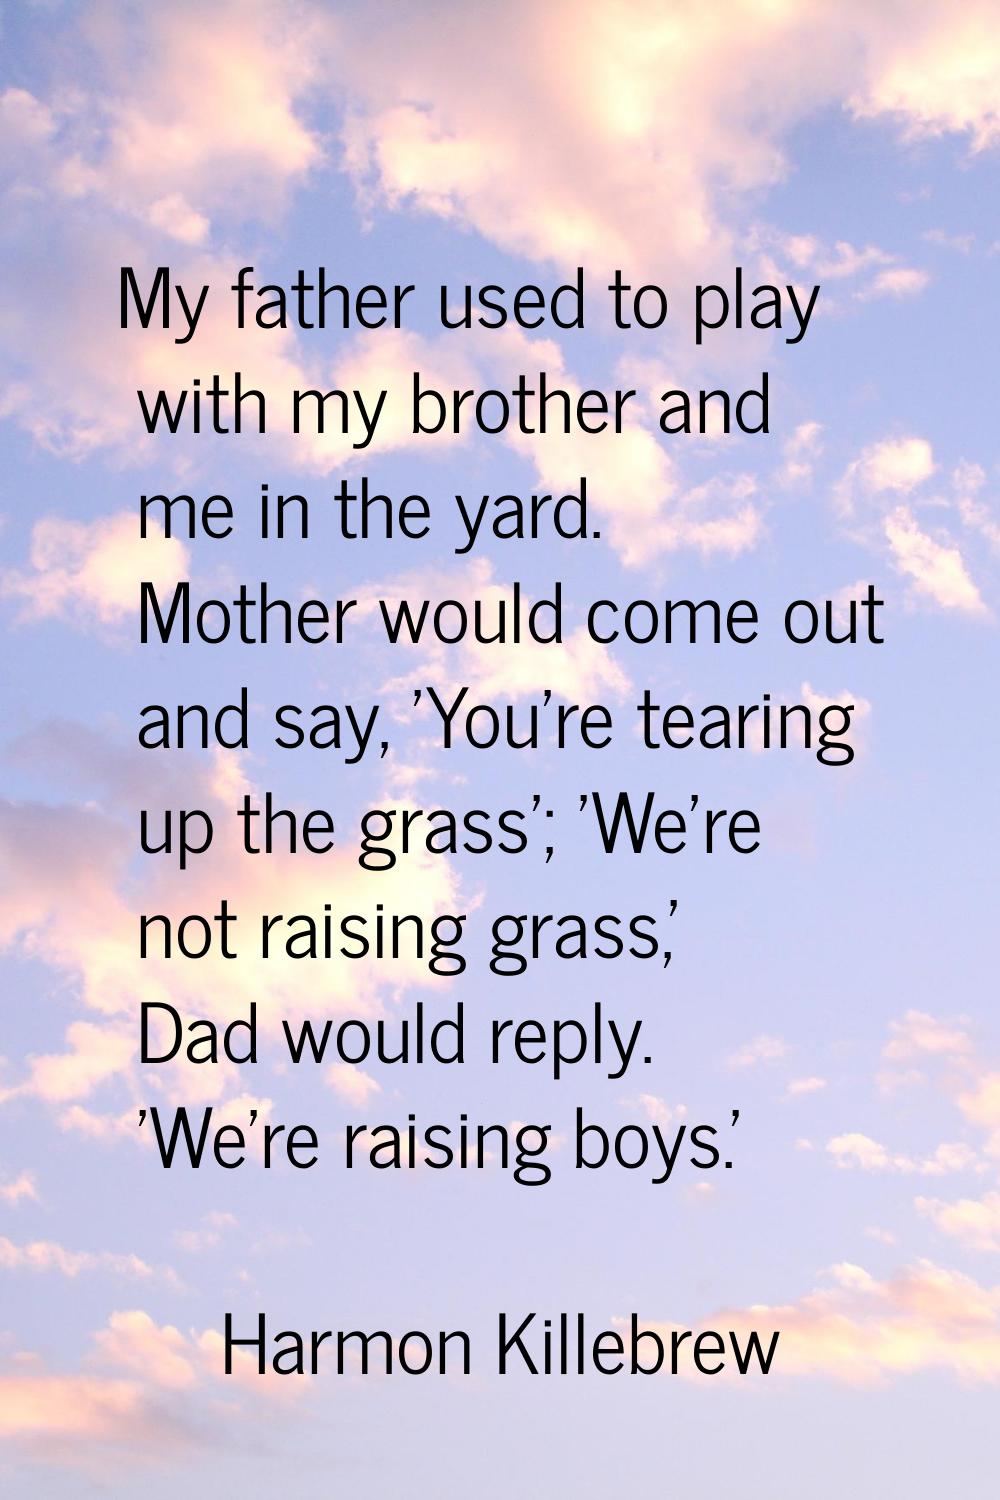 My father used to play with my brother and me in the yard. Mother would come out and say, 'You're t